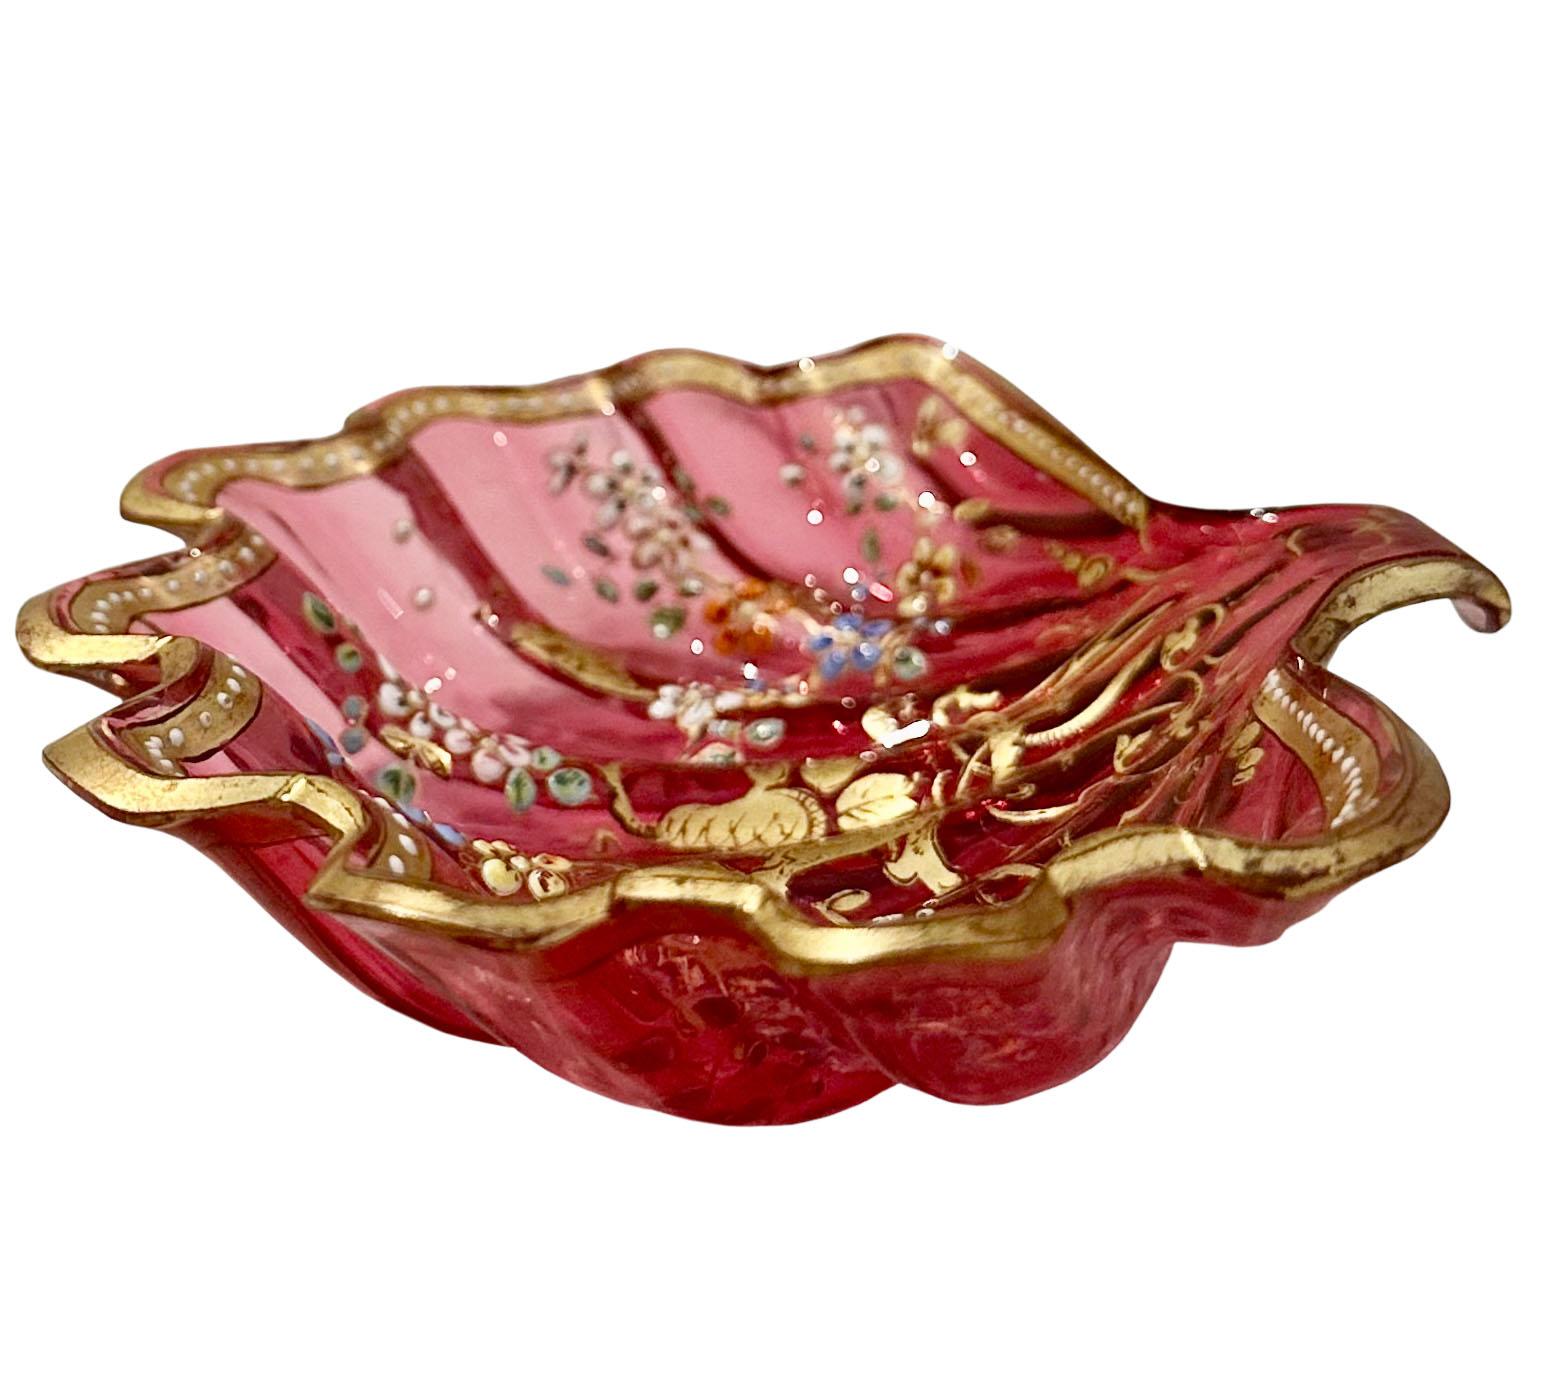 A Mosher cranberry bohemian glass dish circa 1850s to 1890s.  Beautifully decorated with a monogram of the original family. The flowers are enameled with gold gilt. It is a candy or nut dish, small but spectacular. 